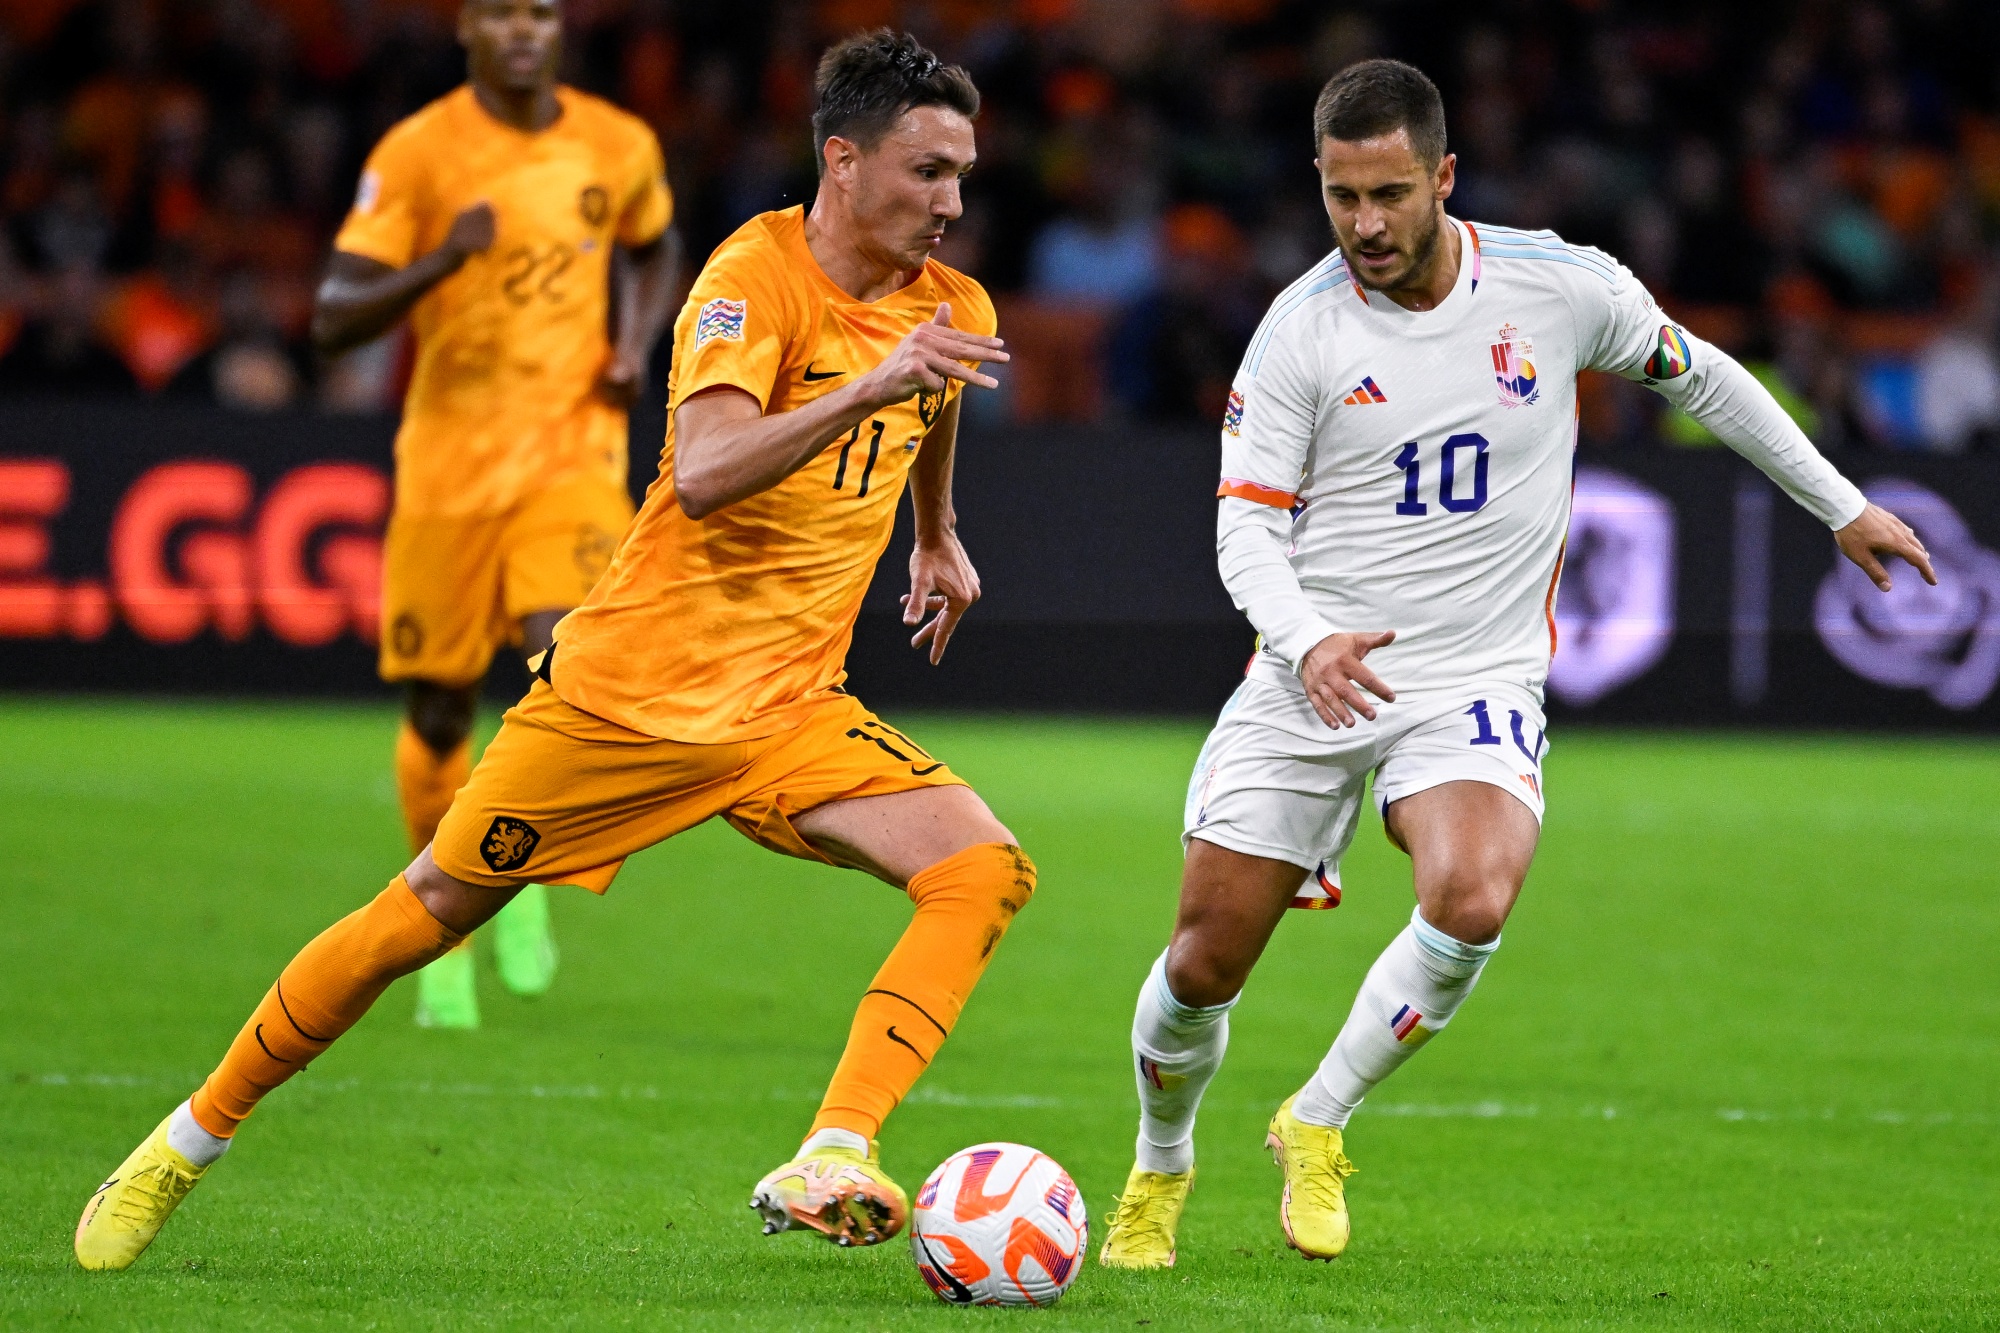 Netherlands' Steven Berghuis and Belgium's Eden Hazard fight for the ball during a soccer game between the Netherlands and Belgian national team the Red Devils, Sunday 25 September 2022 in Amsterdam, the Netherlands, the sixth and last game in the Nations League A group stage. BELGA PHOTO LAURIE DIEFFEMBACQ